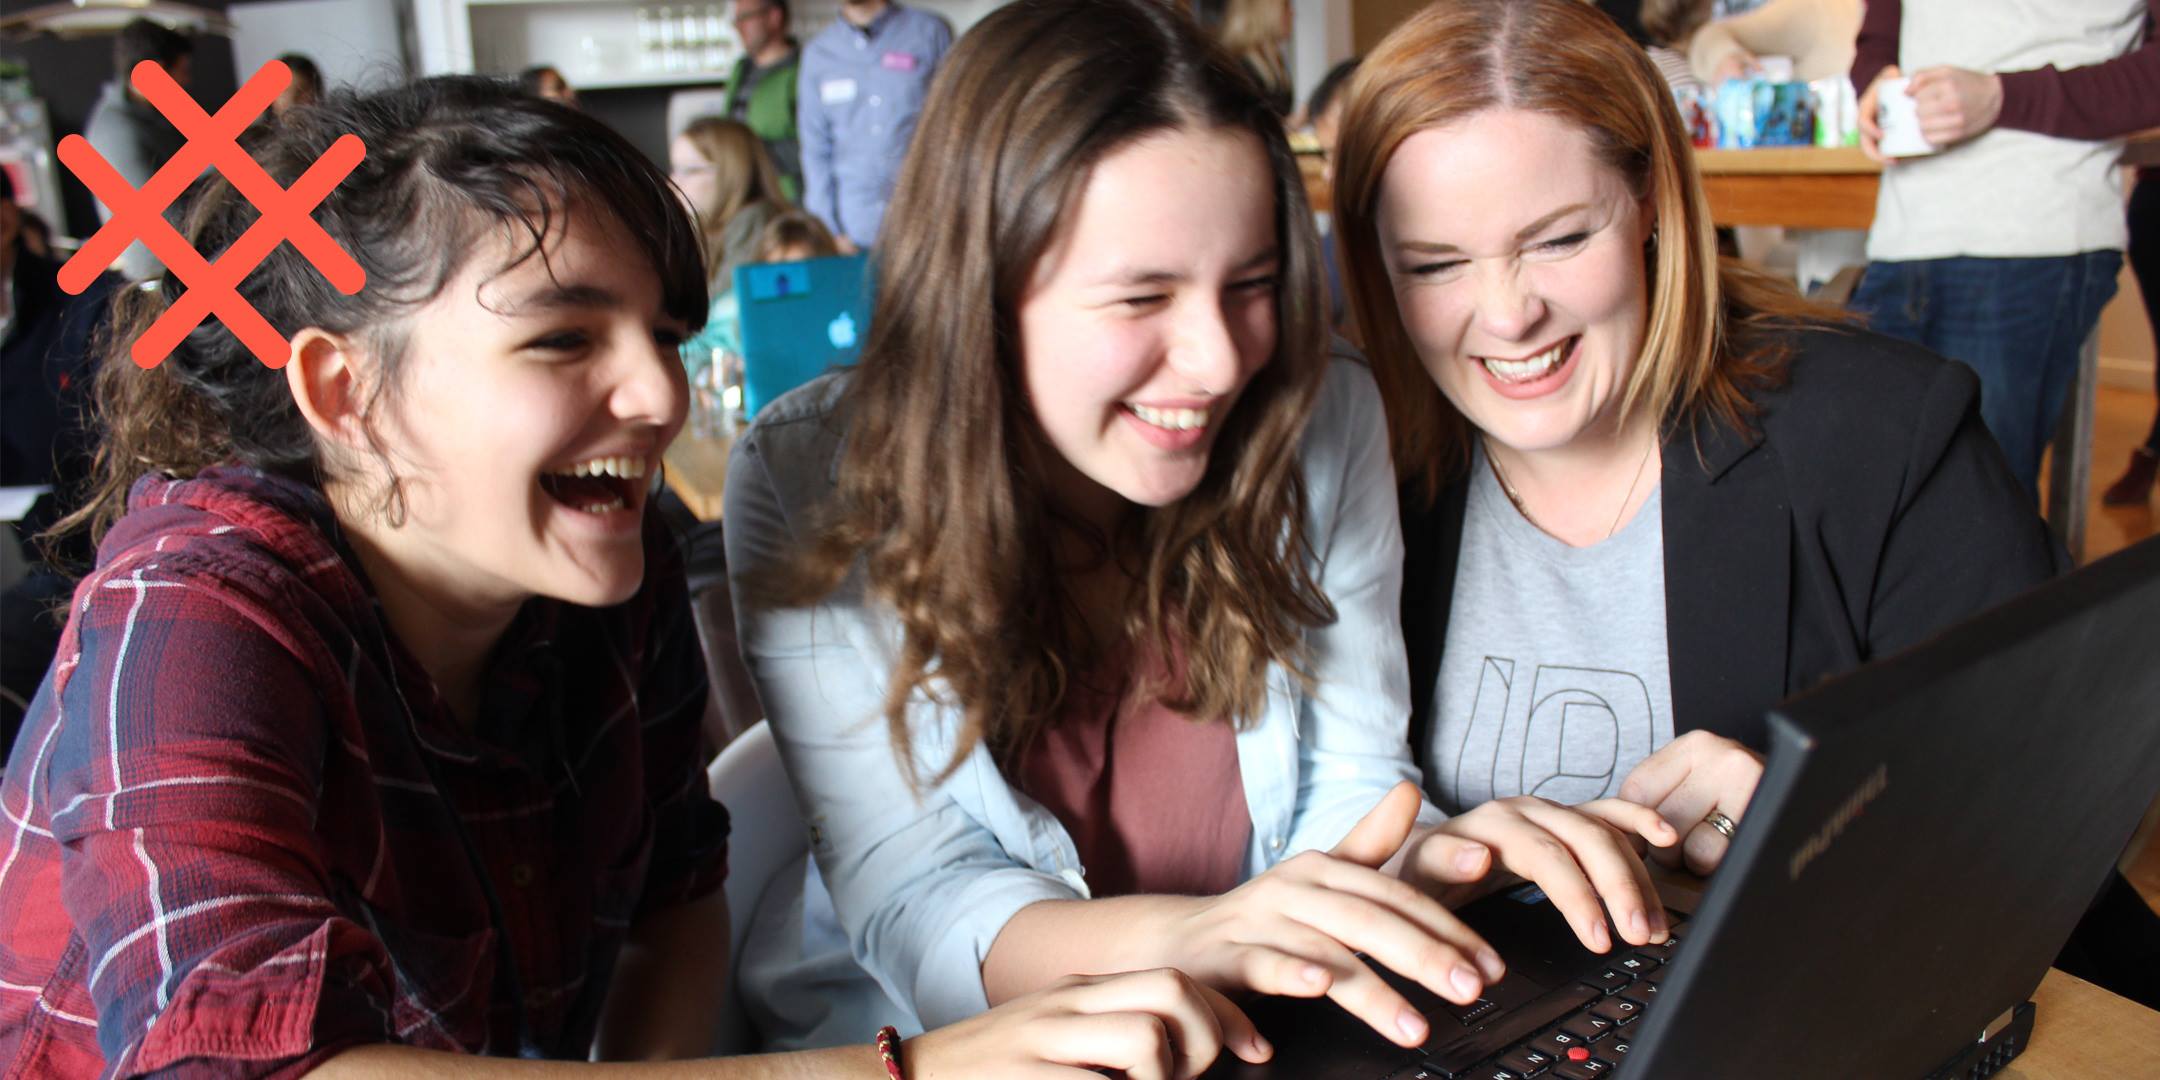 Canada Learning Code launches Teens Learning Code Program